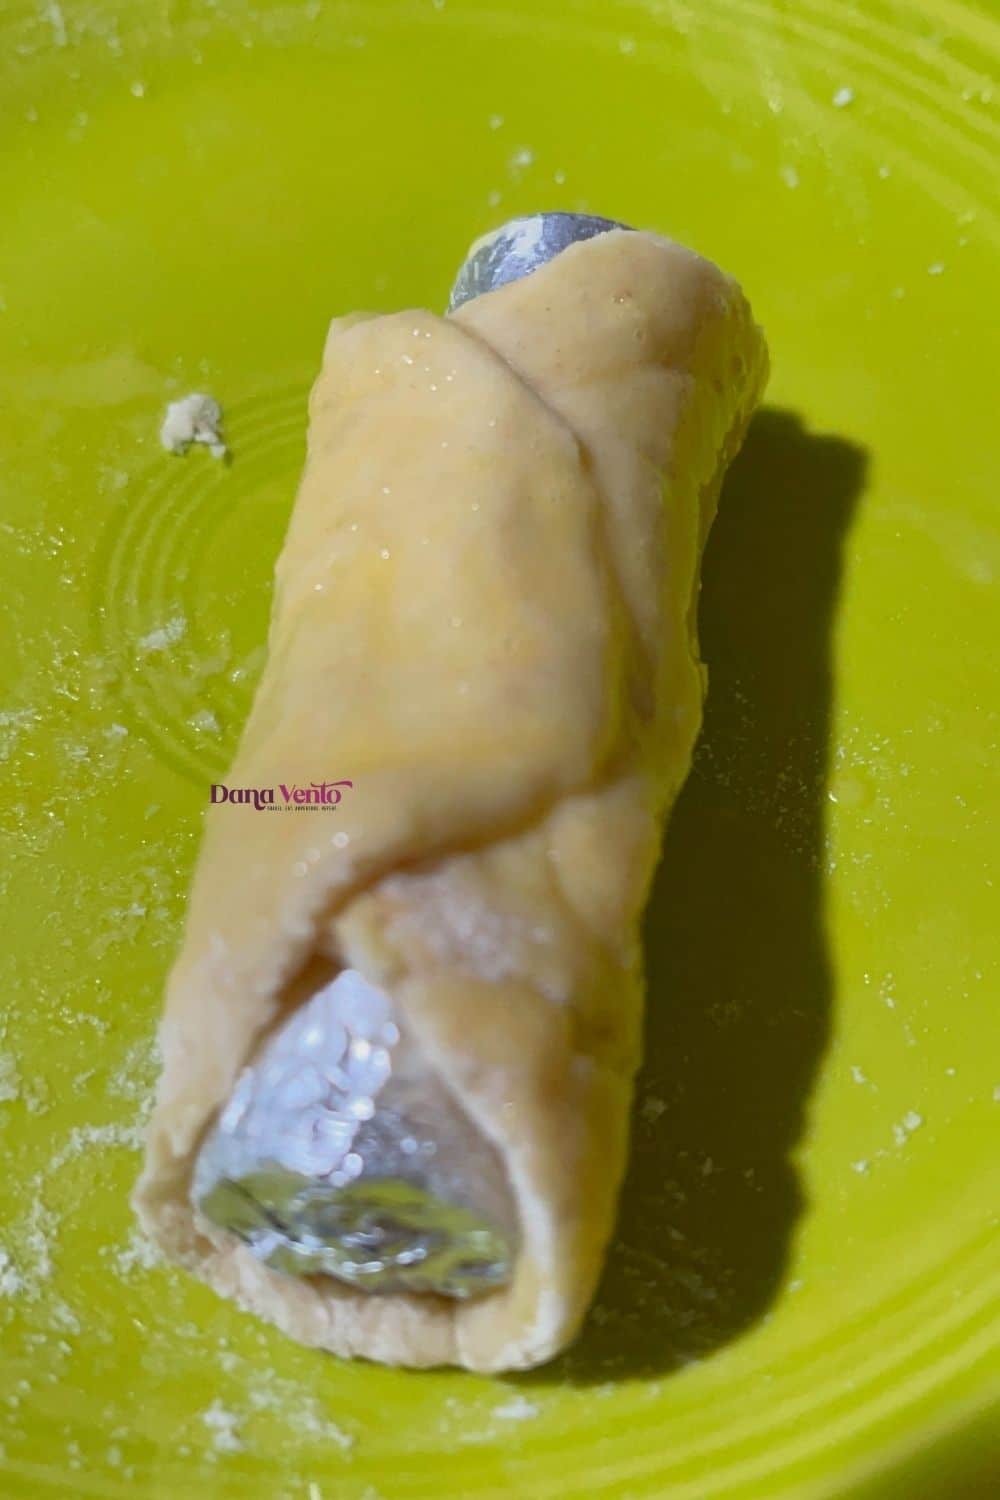 pastry wrapped around a cannoli pin on a plate to be air fried